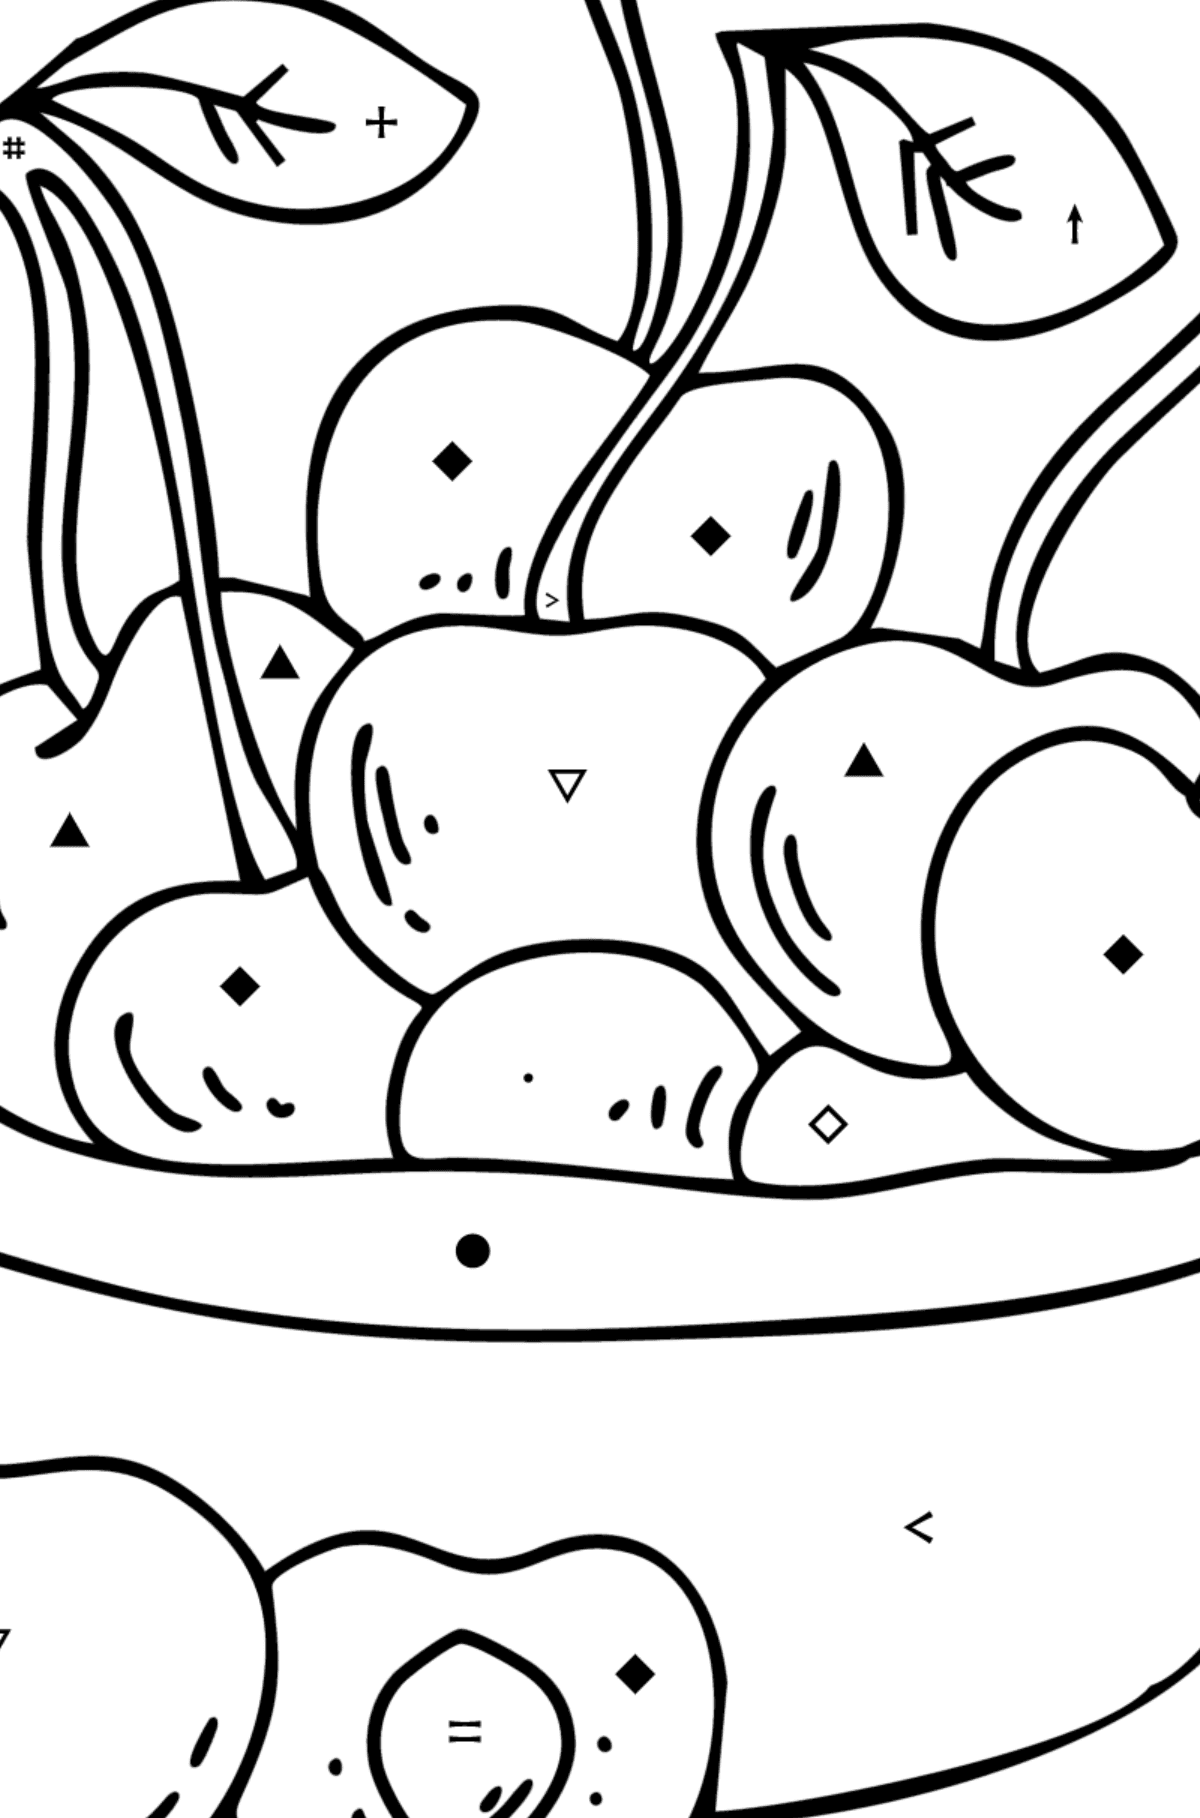 Cherries Plate Coloring Page - Coloring by Symbols for Kids